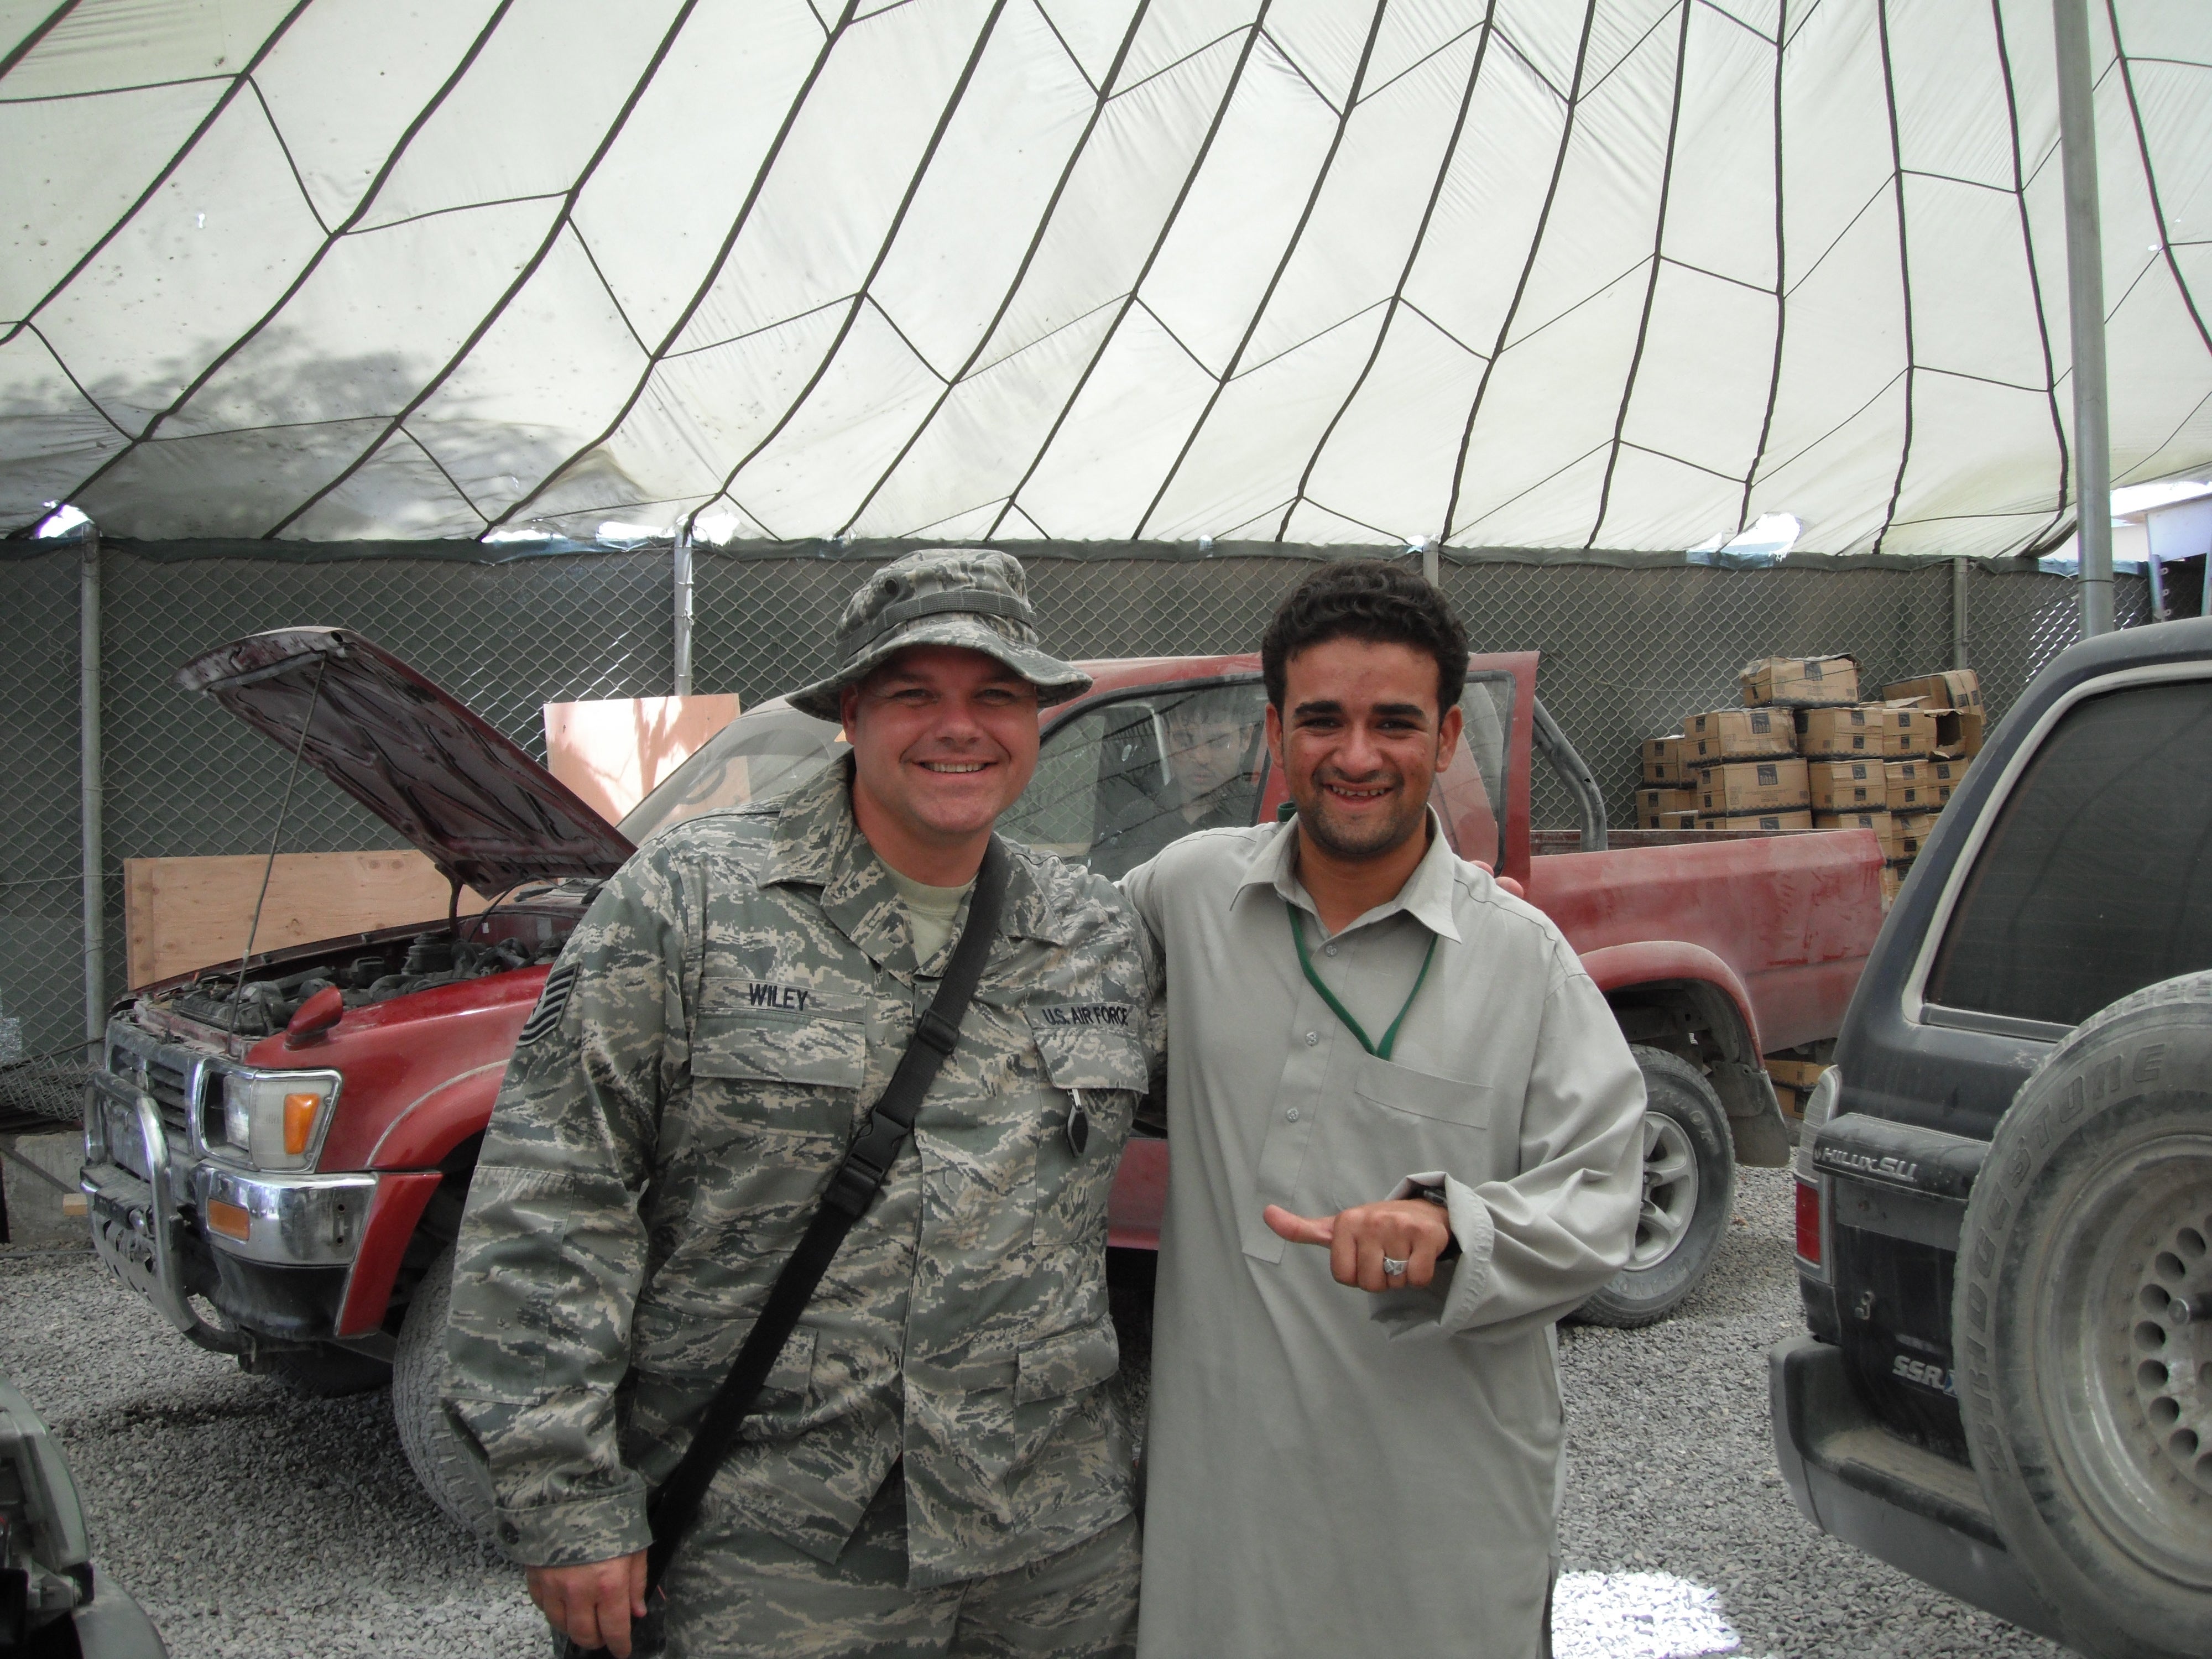 Robert Wiley Jr. (left) alongside a Pakistani car mechanic in Afghanistan. Wiley served 21 years in the Air Force and will earn a Master of Science in Cyber Operations and Resilience online degree in August 2022.